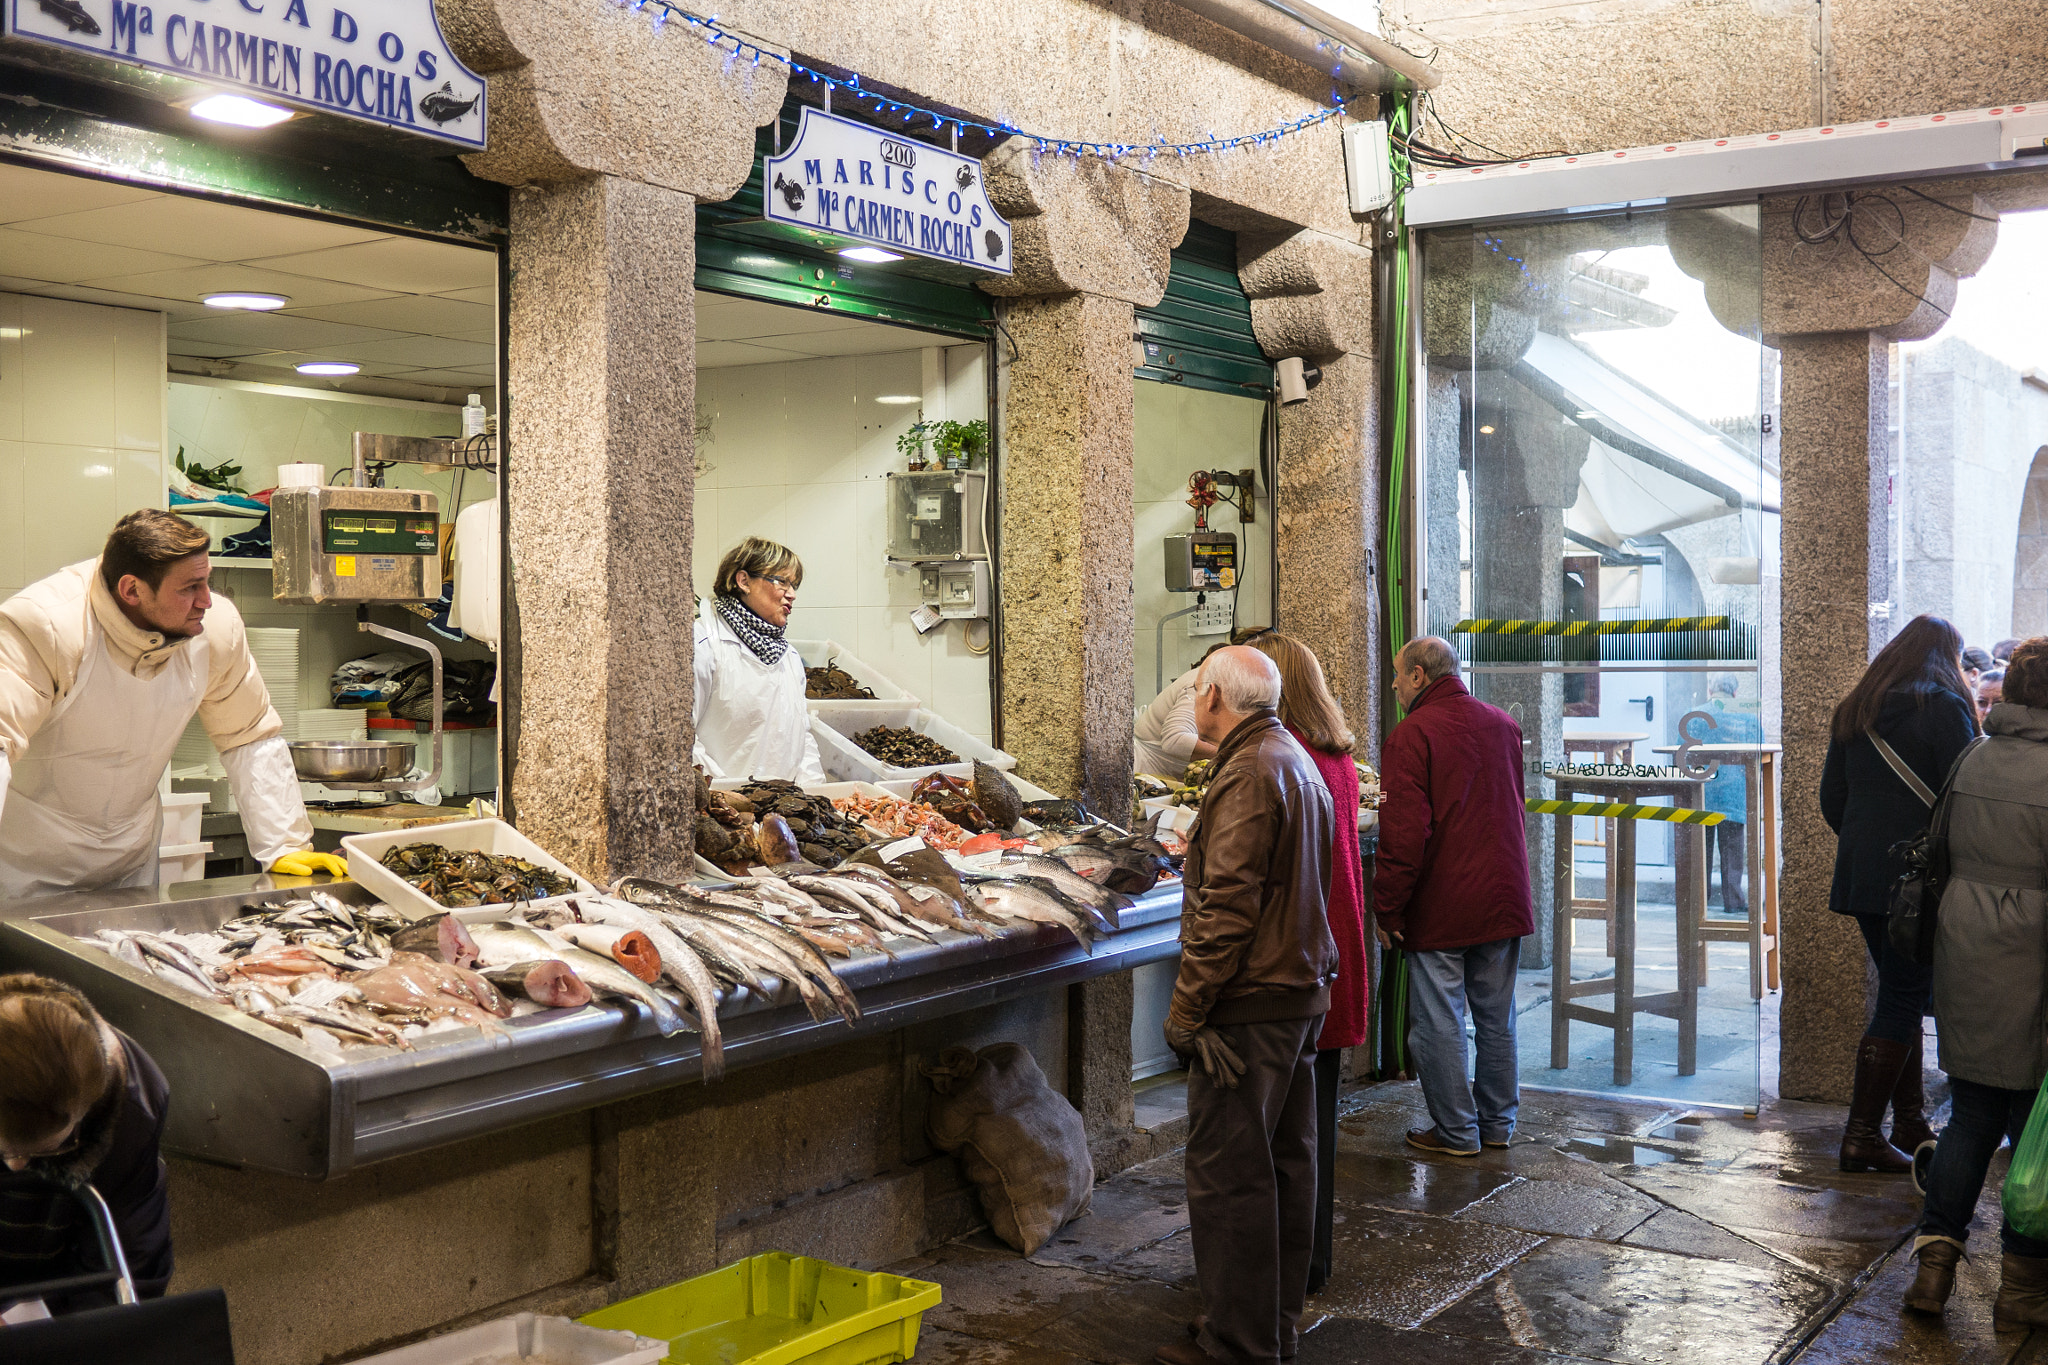 Panasonic Lumix DMC-G5 + Panasonic Lumix G 20mm F1.7 ASPH sample photo. Santiago de compostela, spain - december 14, 2013 - view of a seafood store selling fish in the... photography